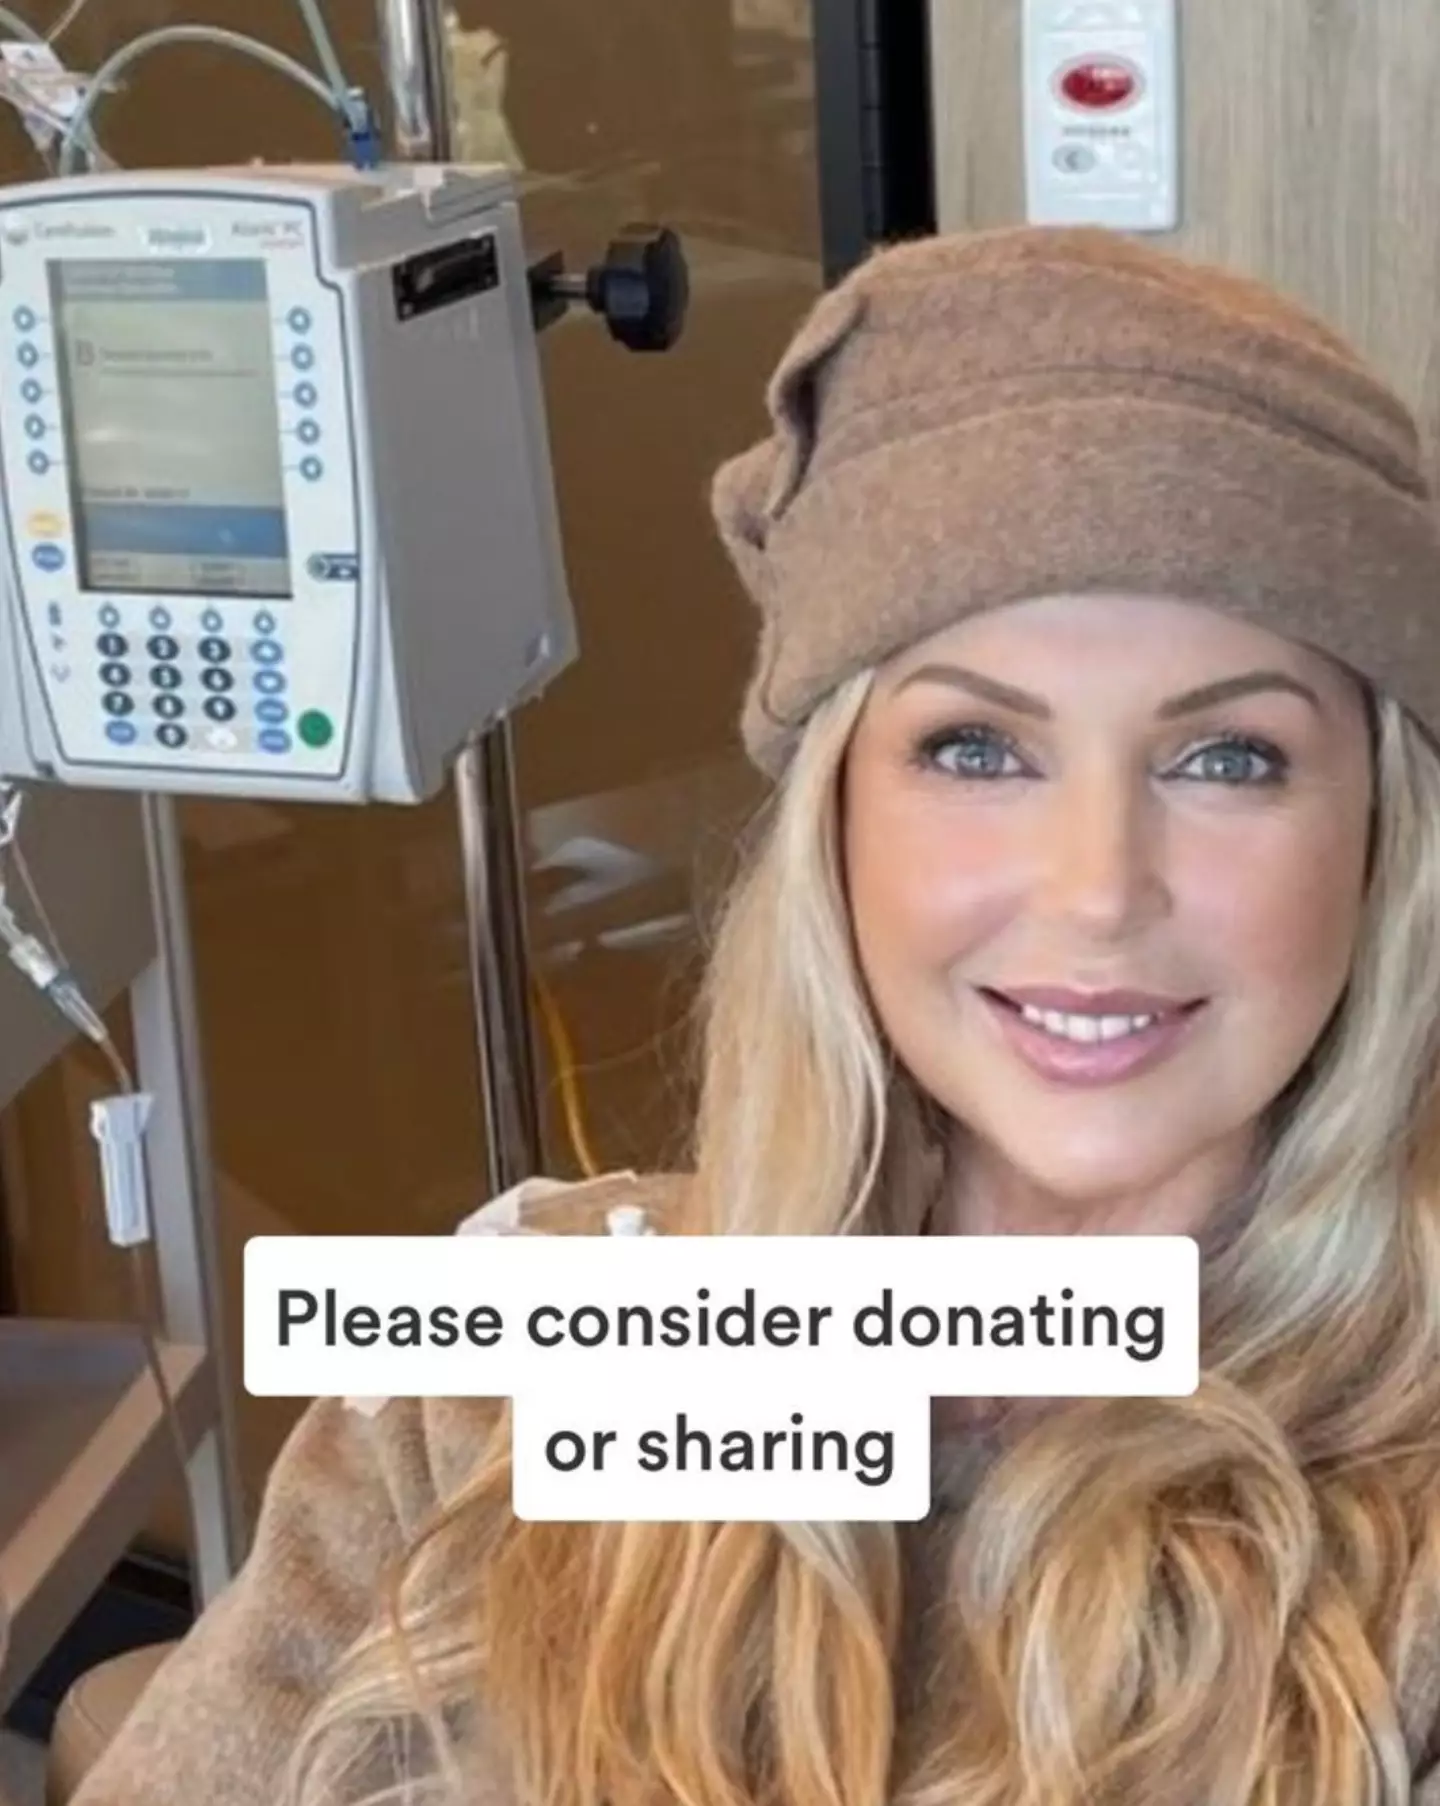 Leane opened up about her journey on Instagram to spread awareness.